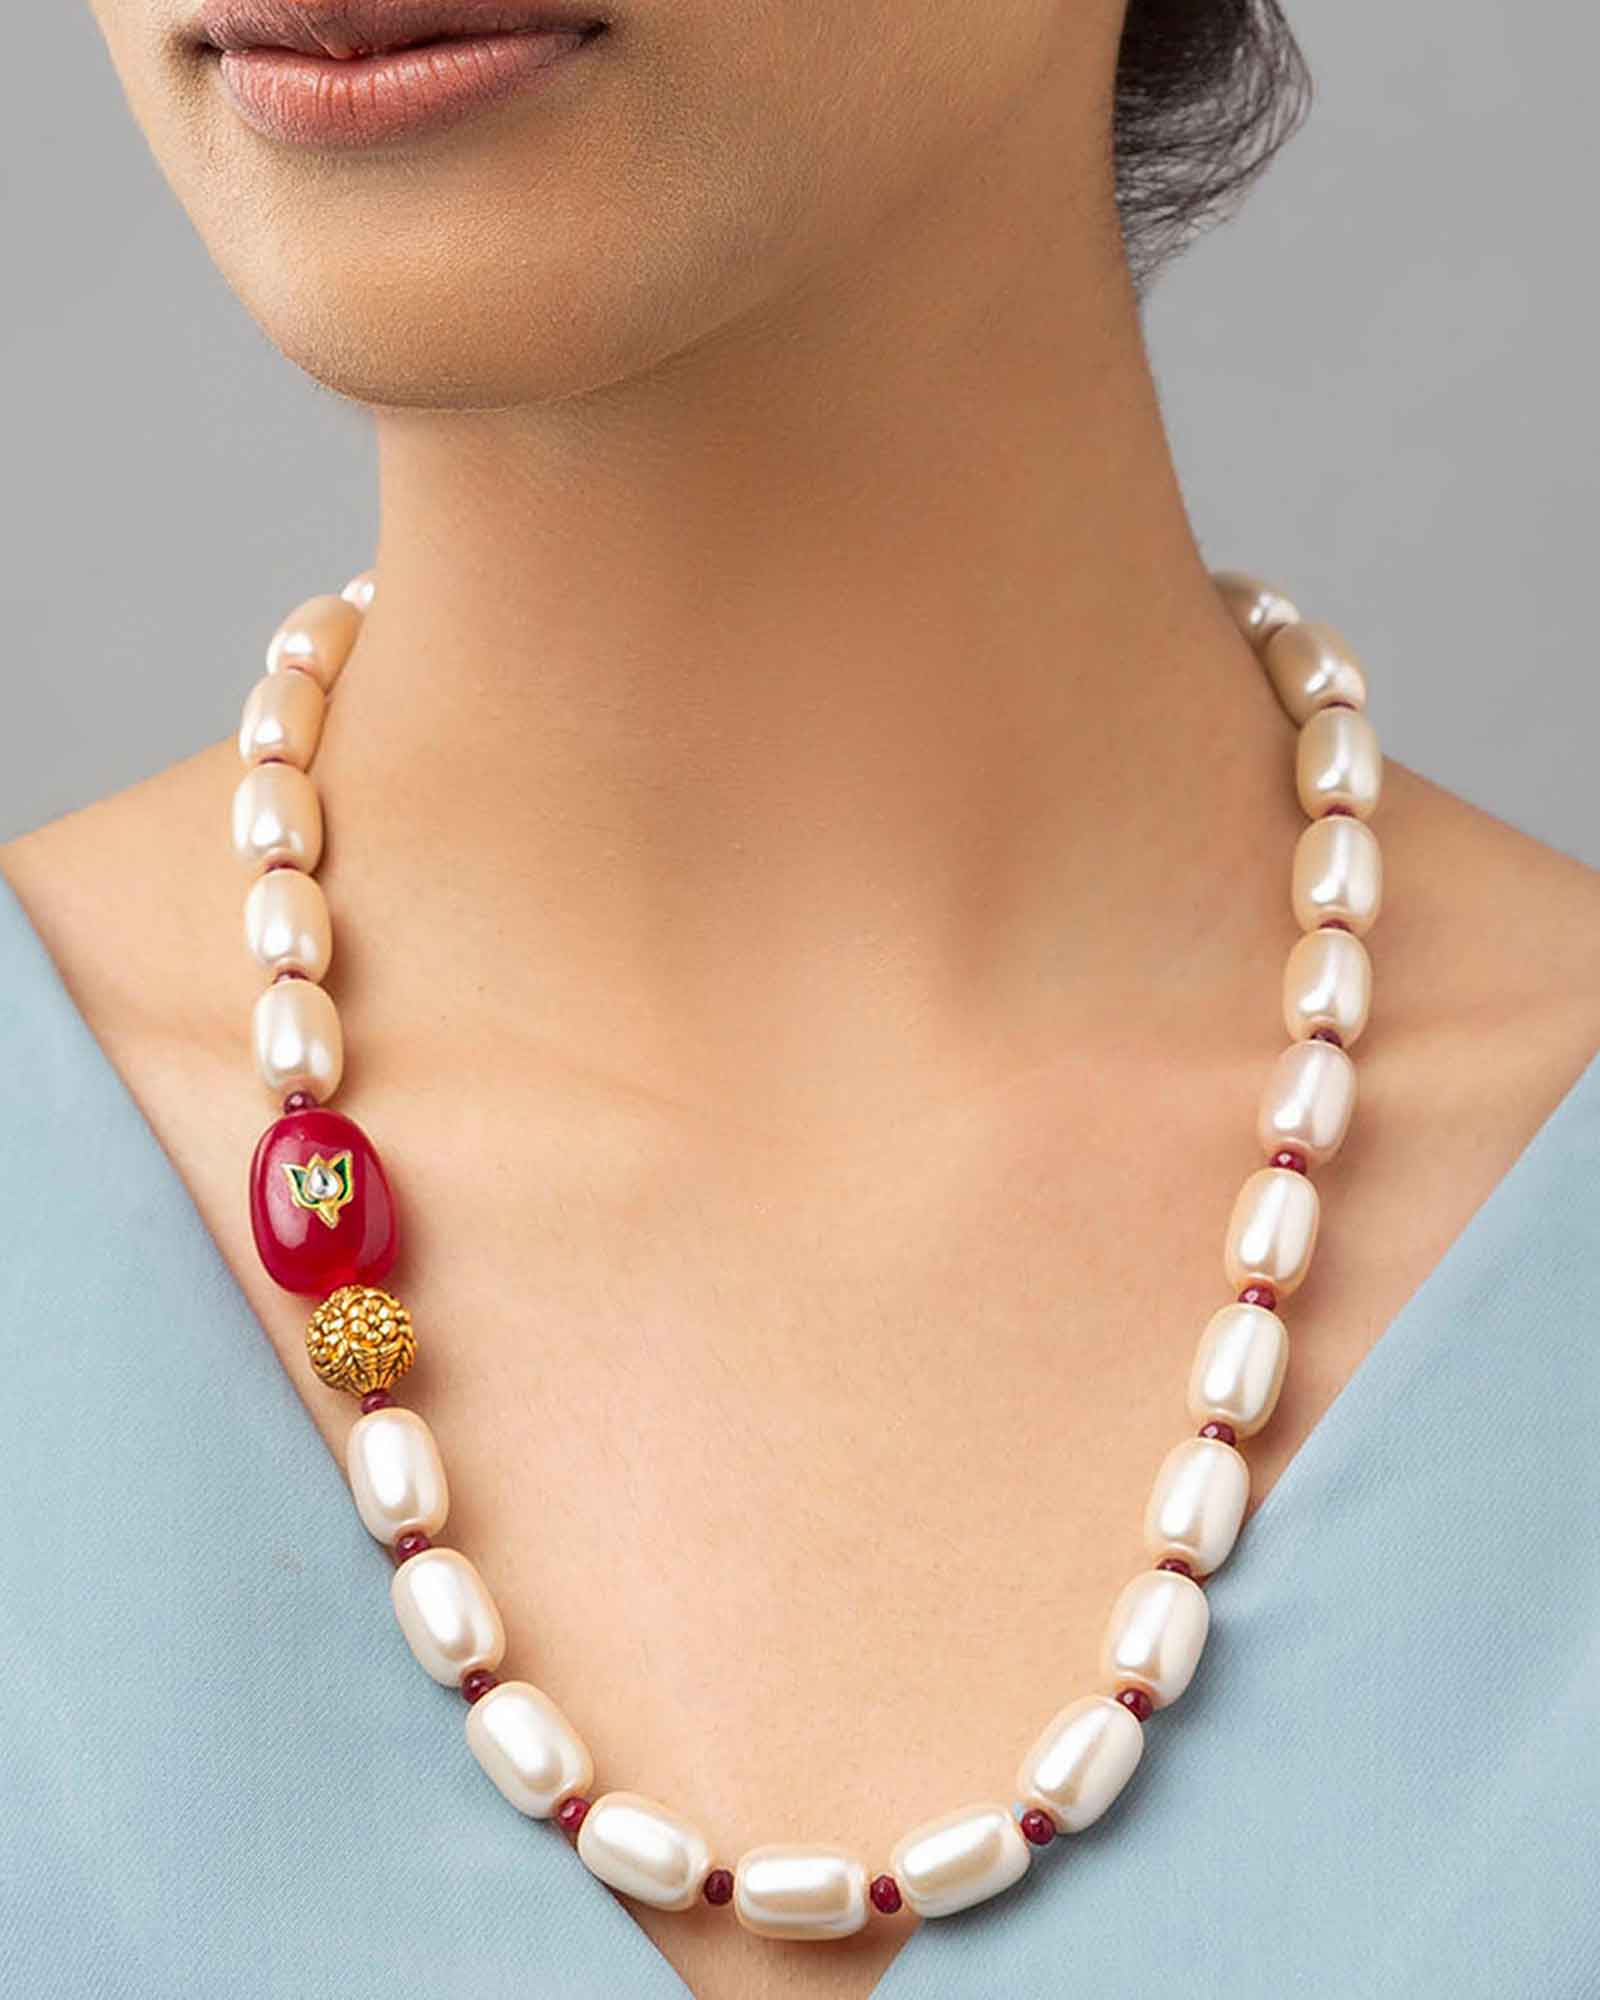 Gold Single-Layered Necklace With Agate Swarovski Beads